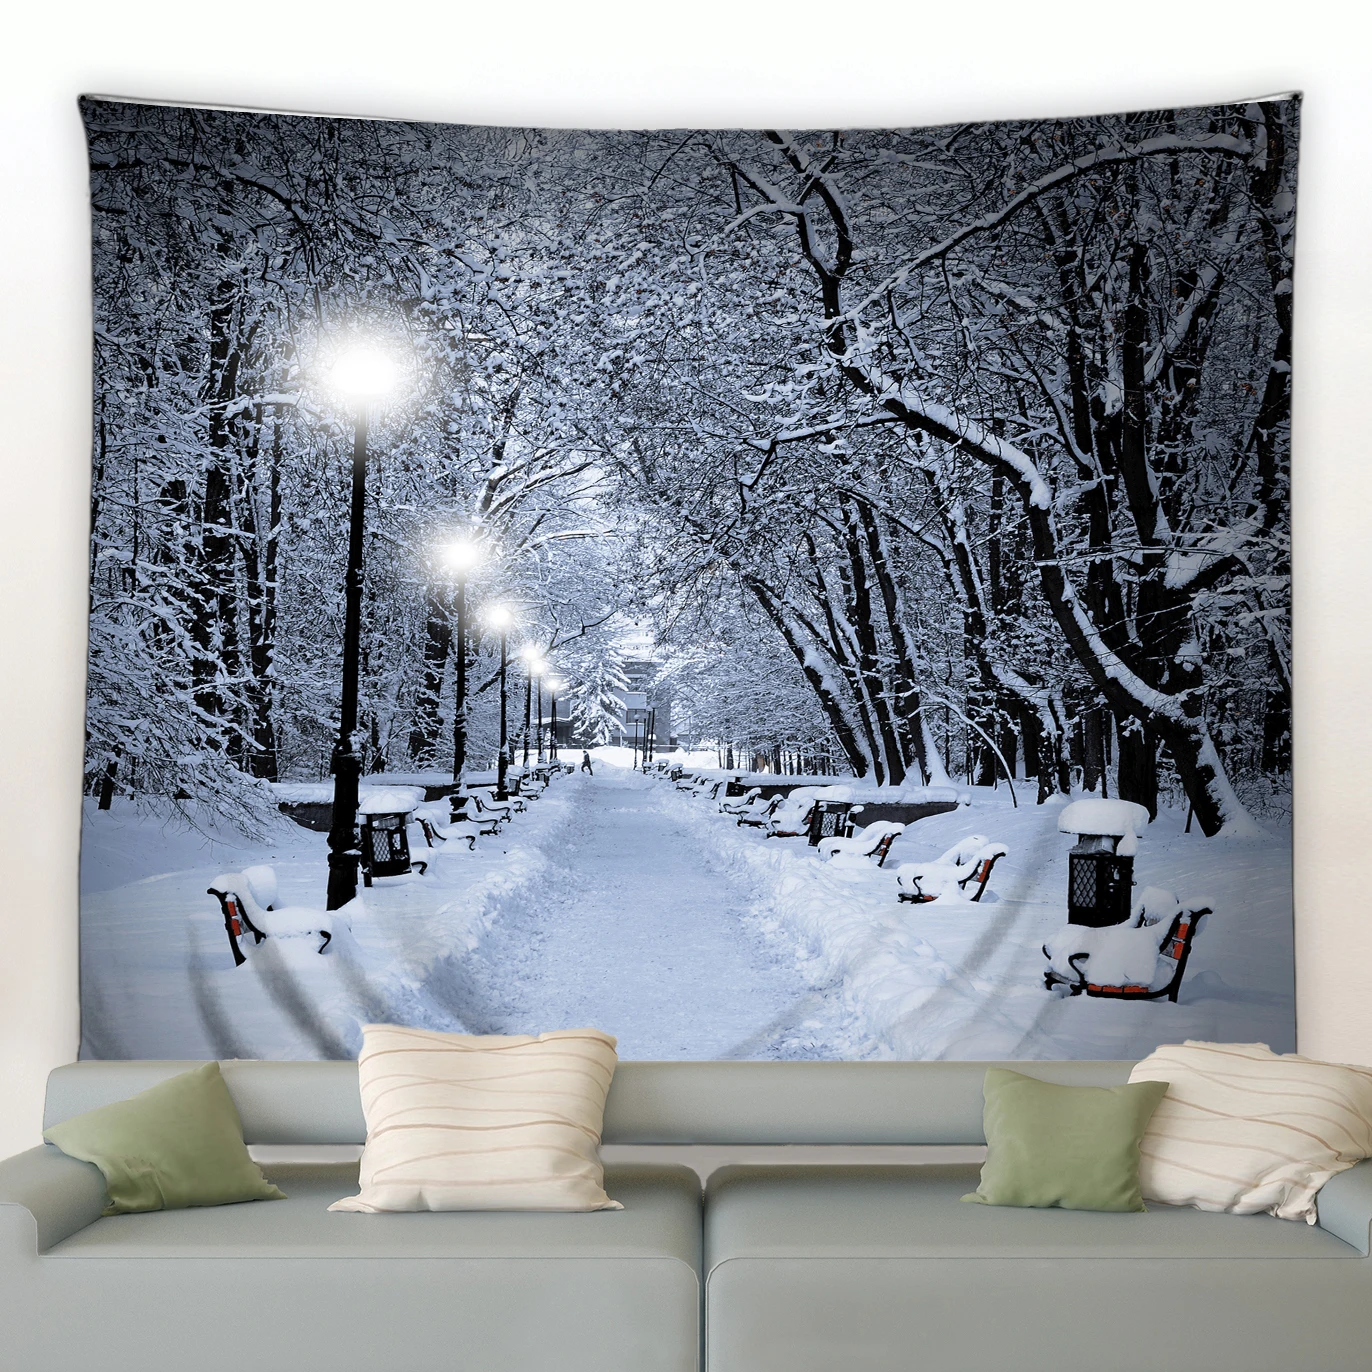 

Snow Forest Tapestry Trees in Snowy Jungle Wall Hanging Blanket Winter Scenery Tapestries Bedroom Living Room Dorm Wall Decor